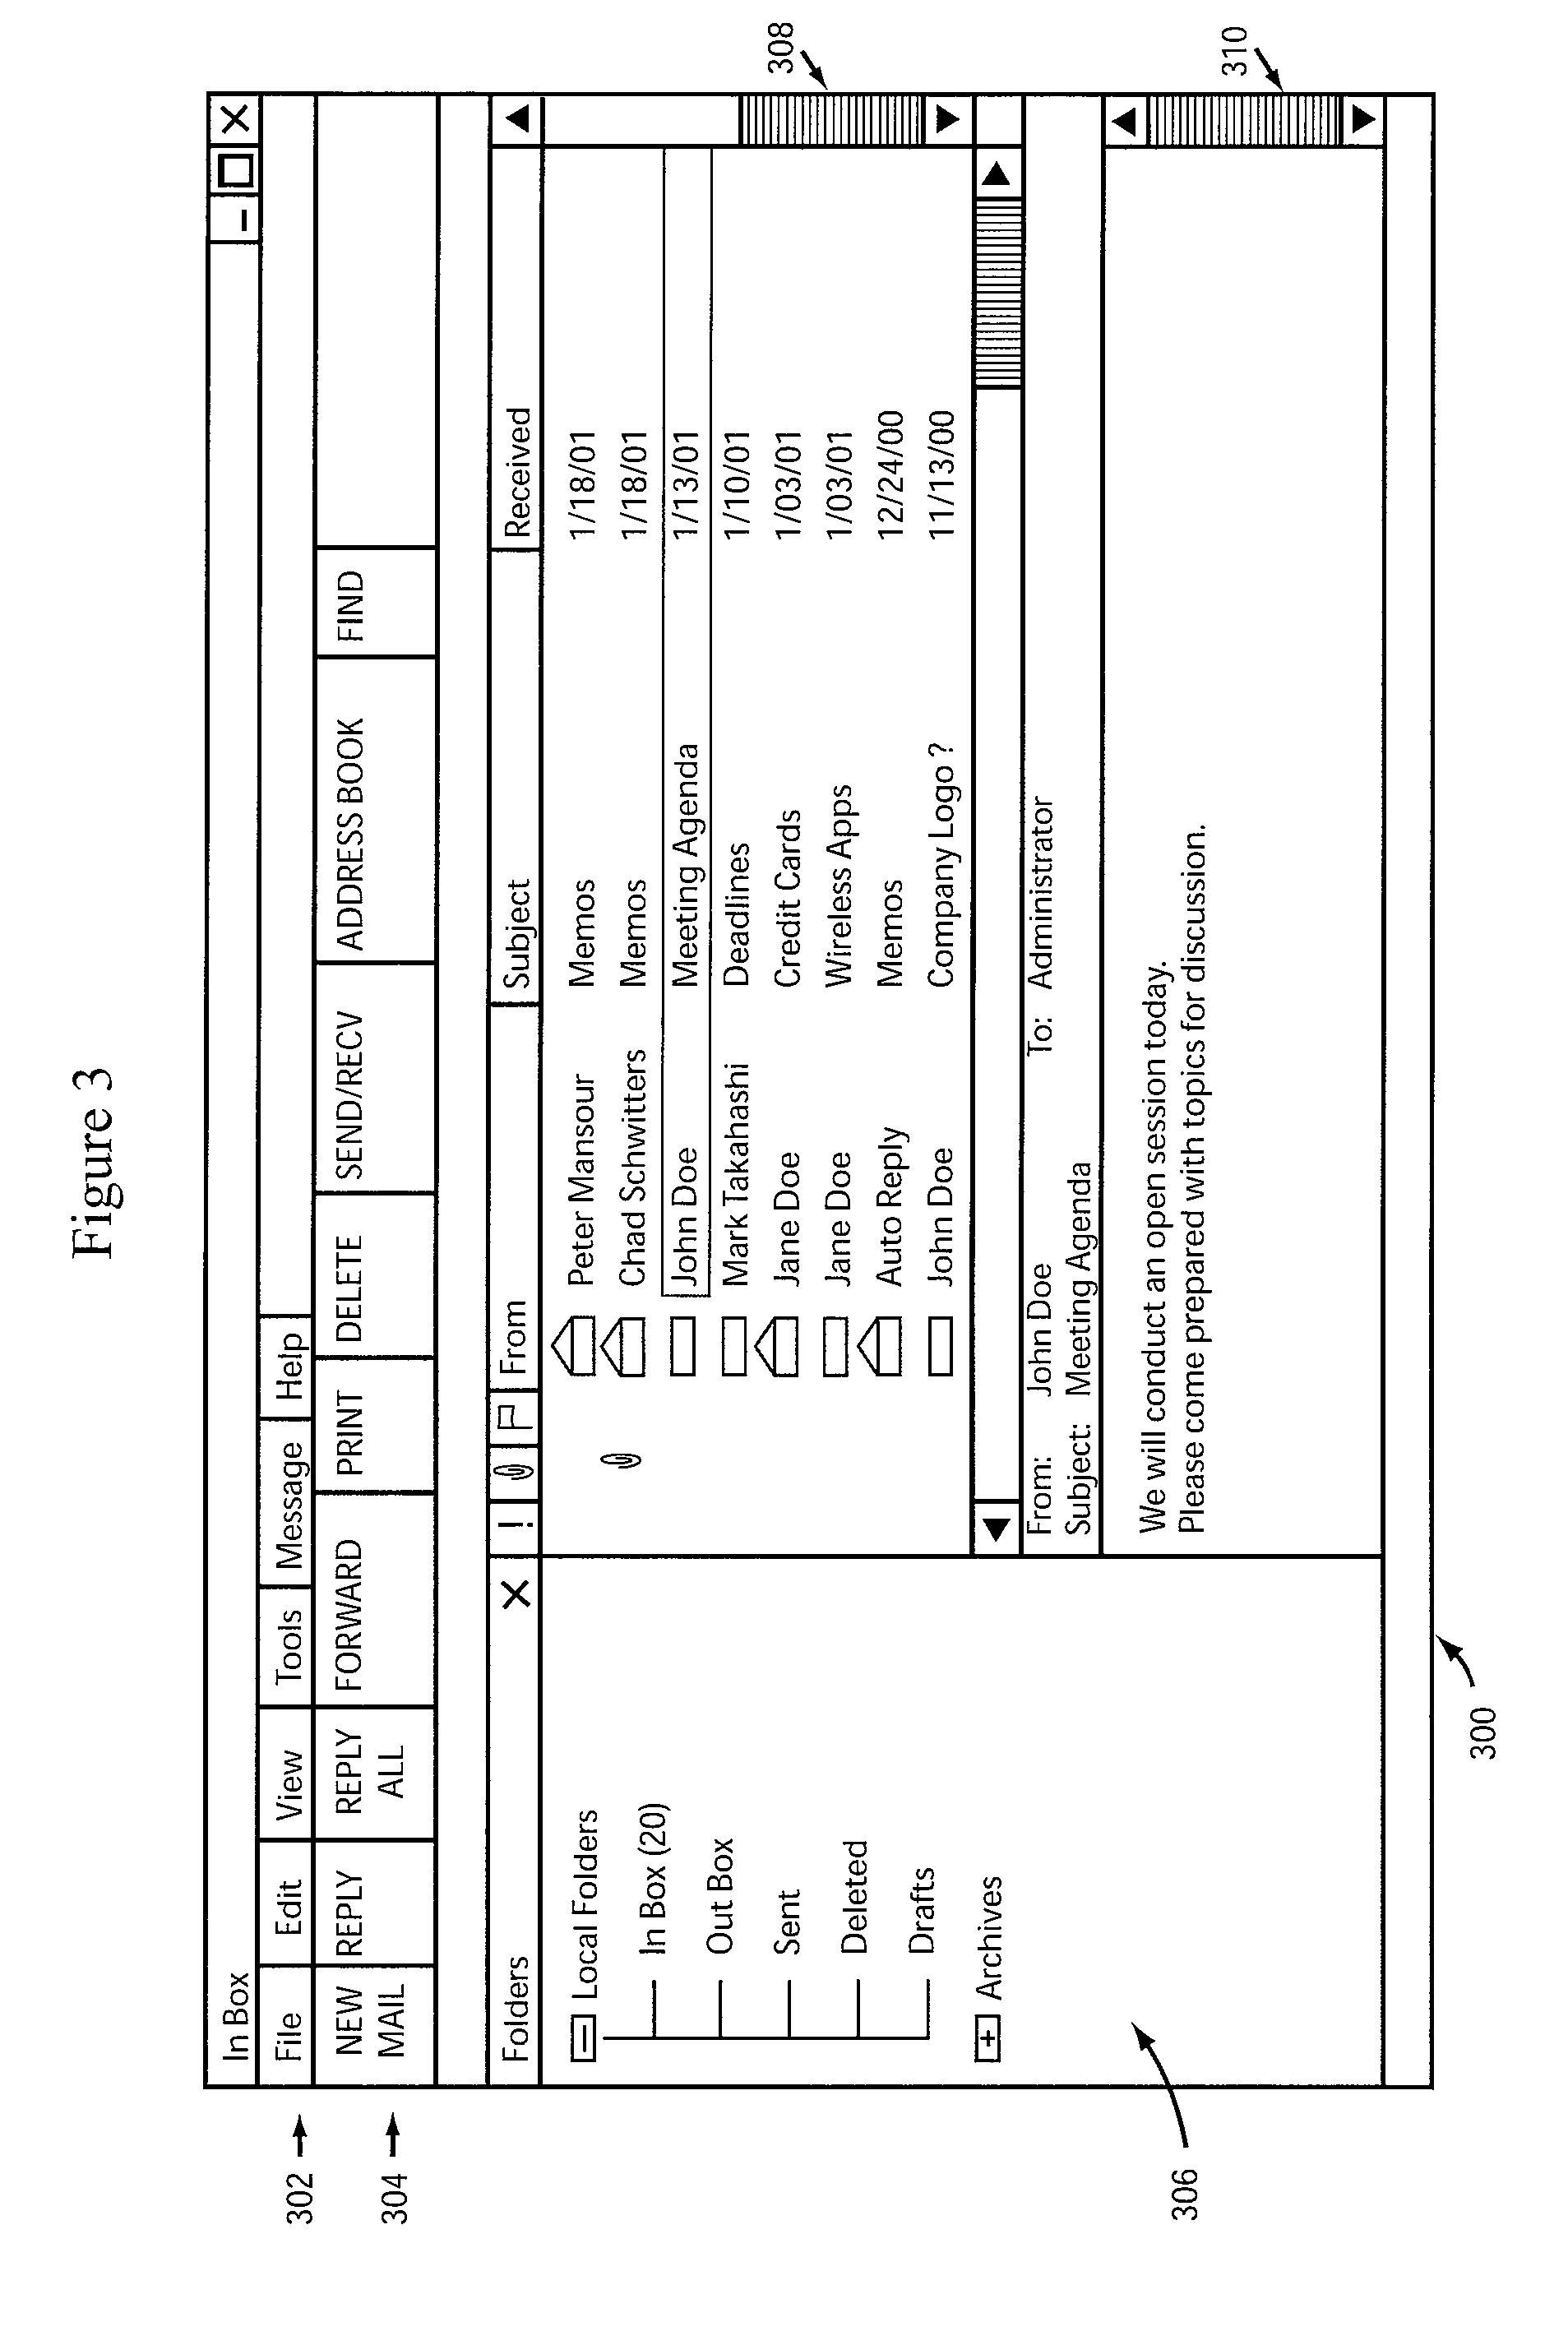 Platform-independent distributed user interface system architecture